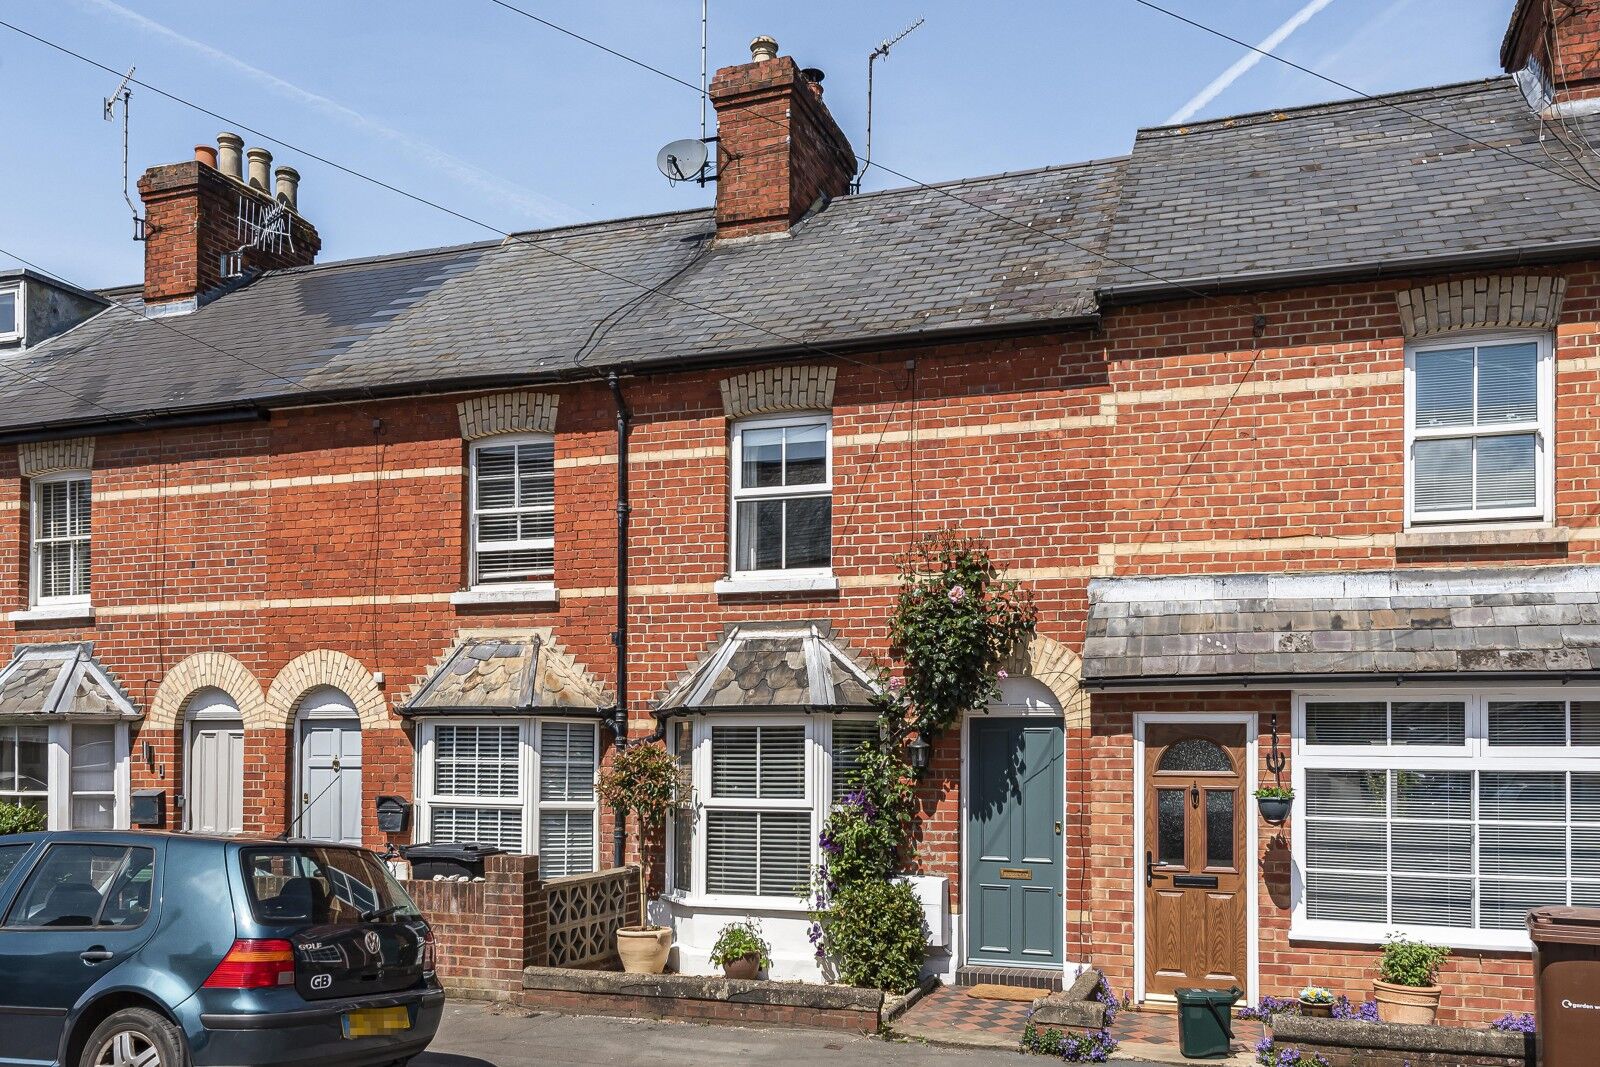 3 bedroom mid terraced house for sale Park Road, Henley-On-Thames, RG9, main image